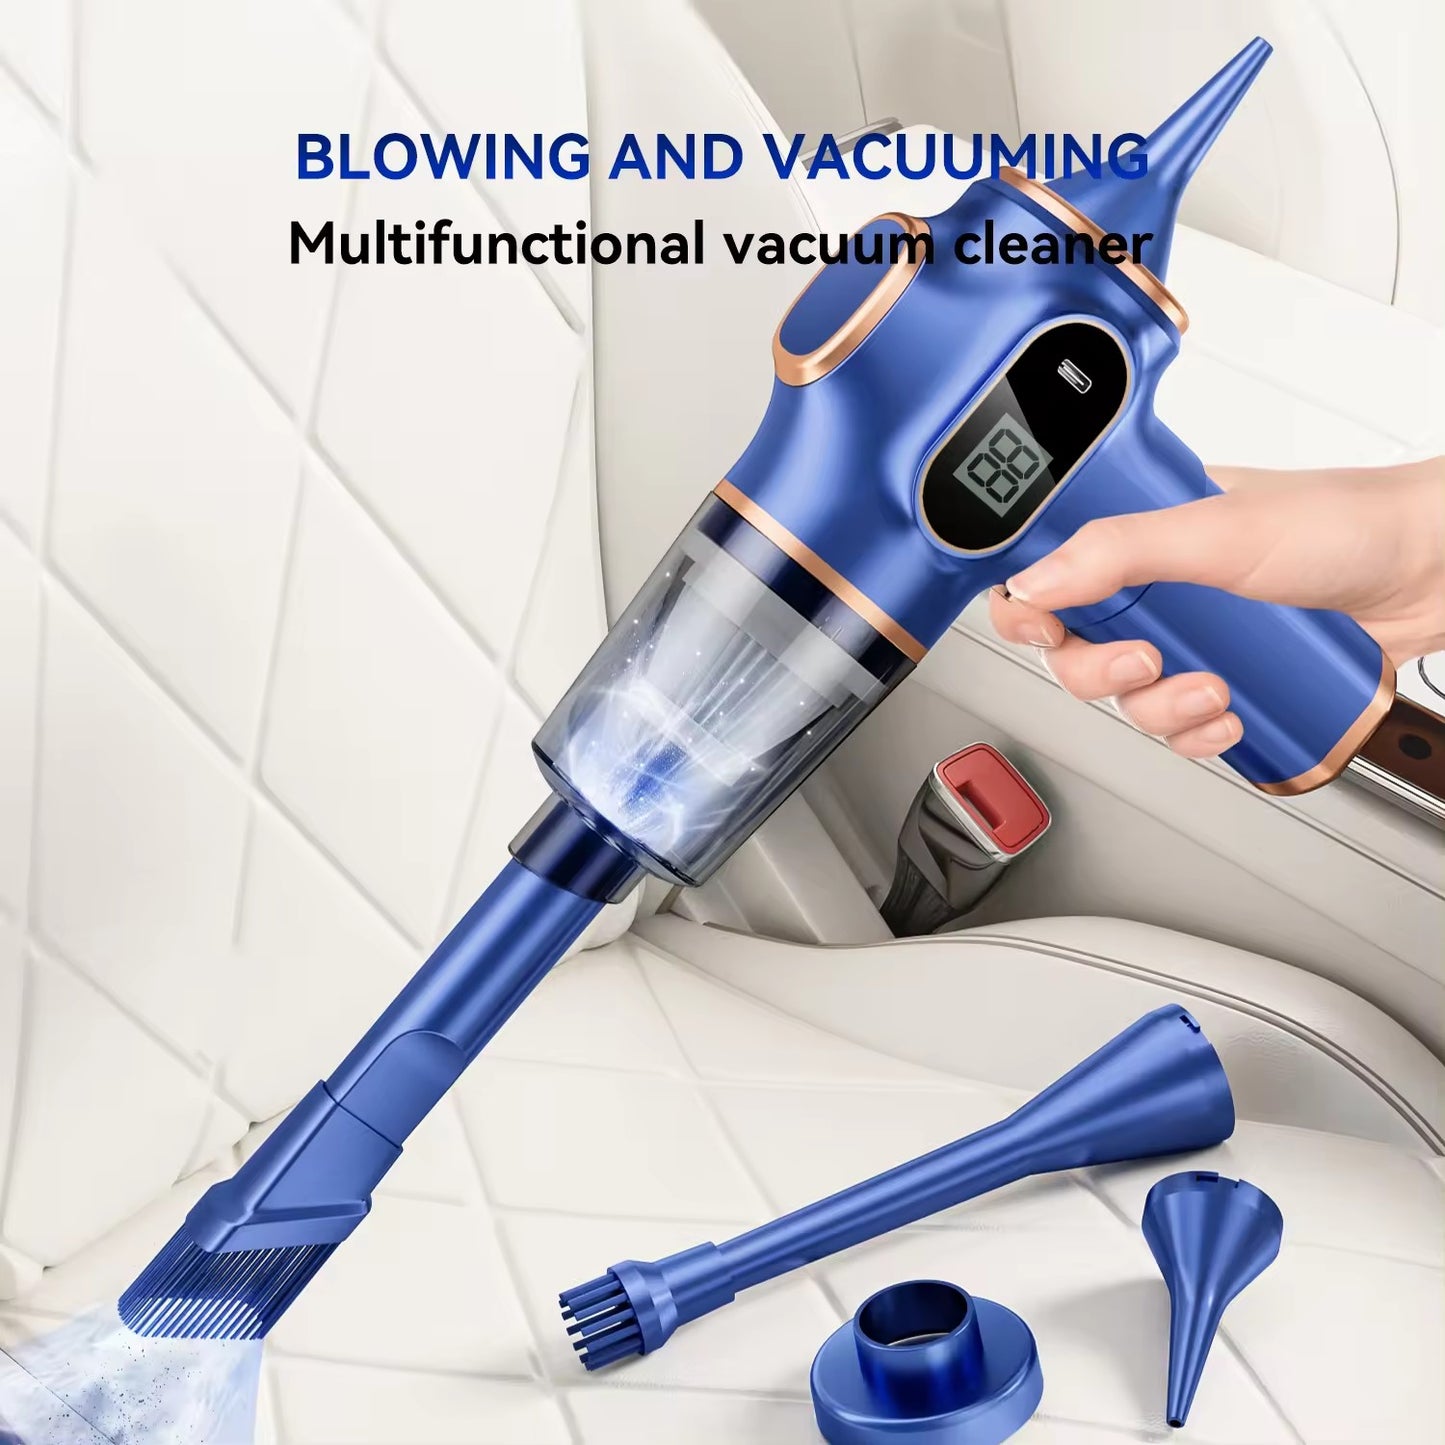 Portable Vacuum Cleaner Wireless Blowing Suction One High Power Vehicle laptop Multifunction Powerful Car Vacuum Cleaner